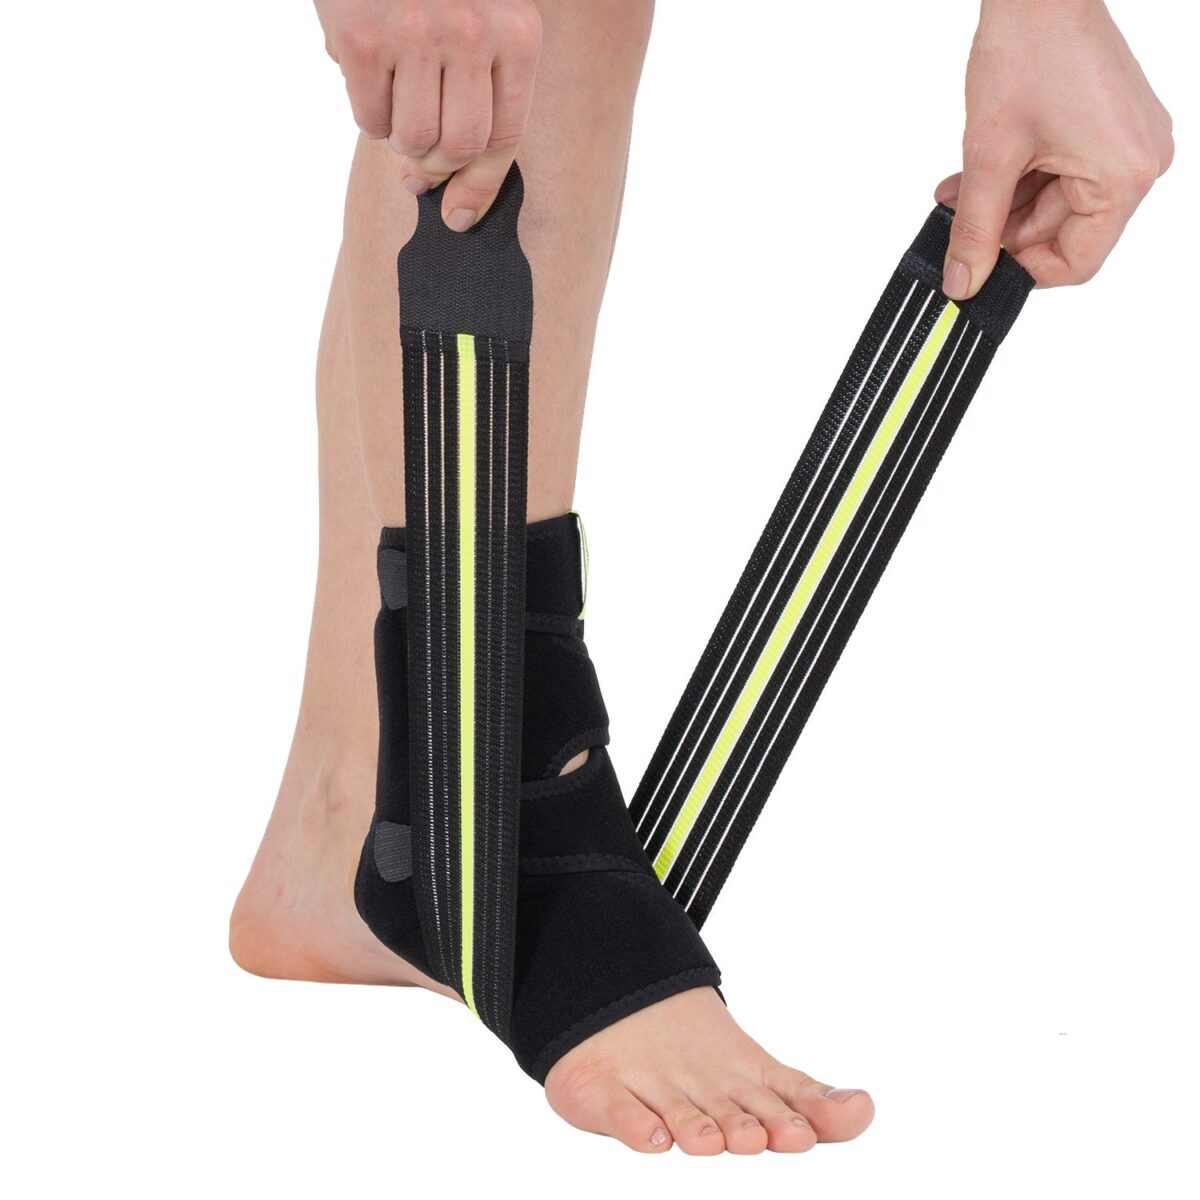 wingmed orthopedic equipments W605 malleol ankle support with 8 strap 75 1